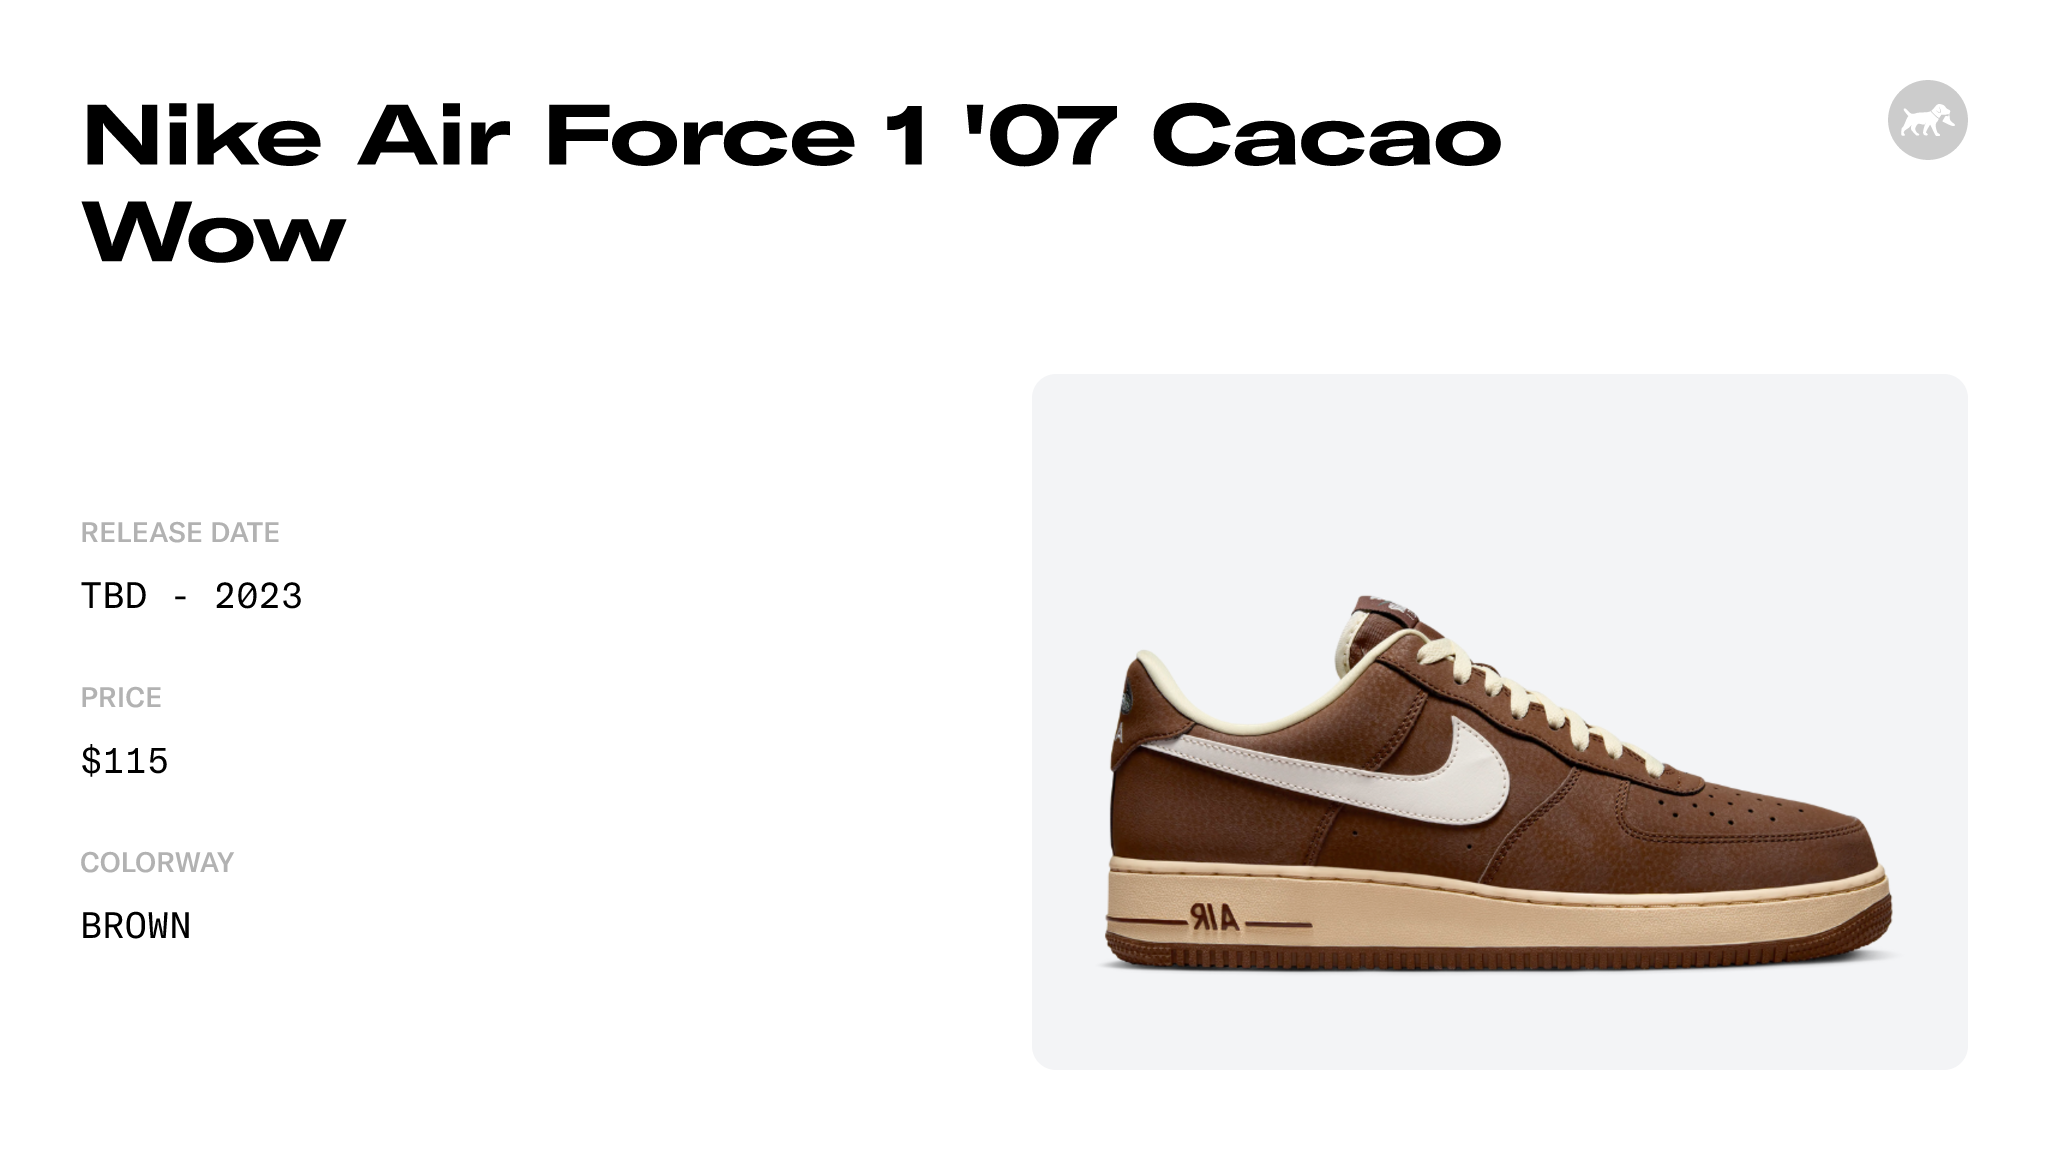 Nike Air Force 1 '07 Cacao Wow - FZ3592-259 Raffles and Release Date